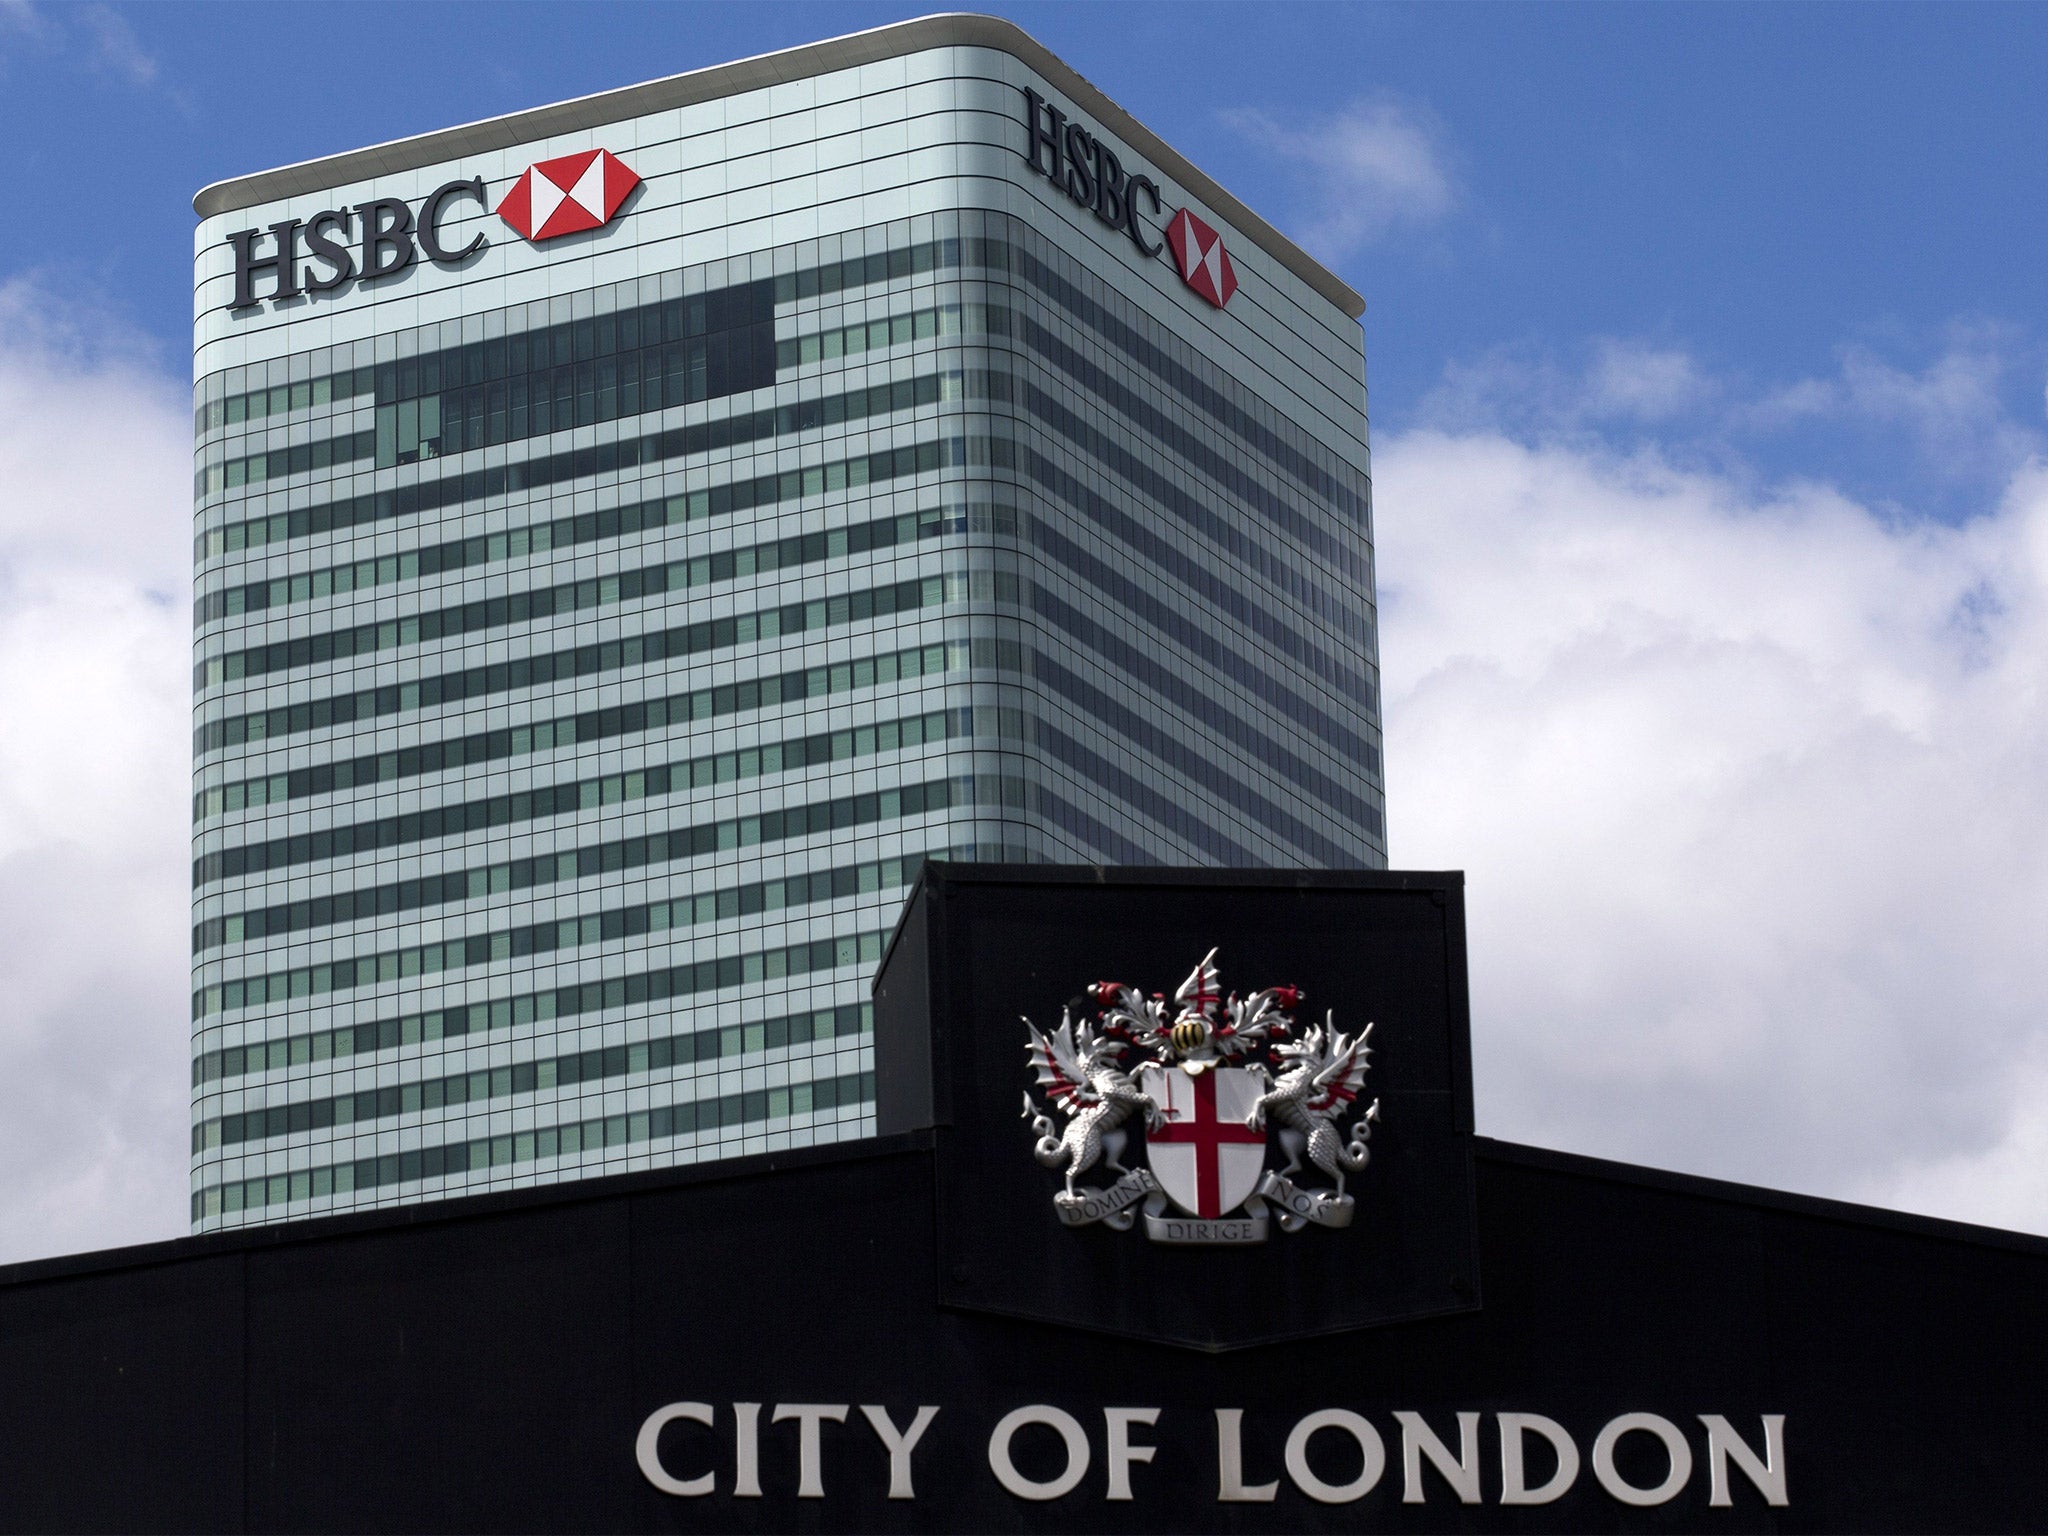 HSBC shares tumbled after leak of Suspicious Activity Reports to US watchdogs